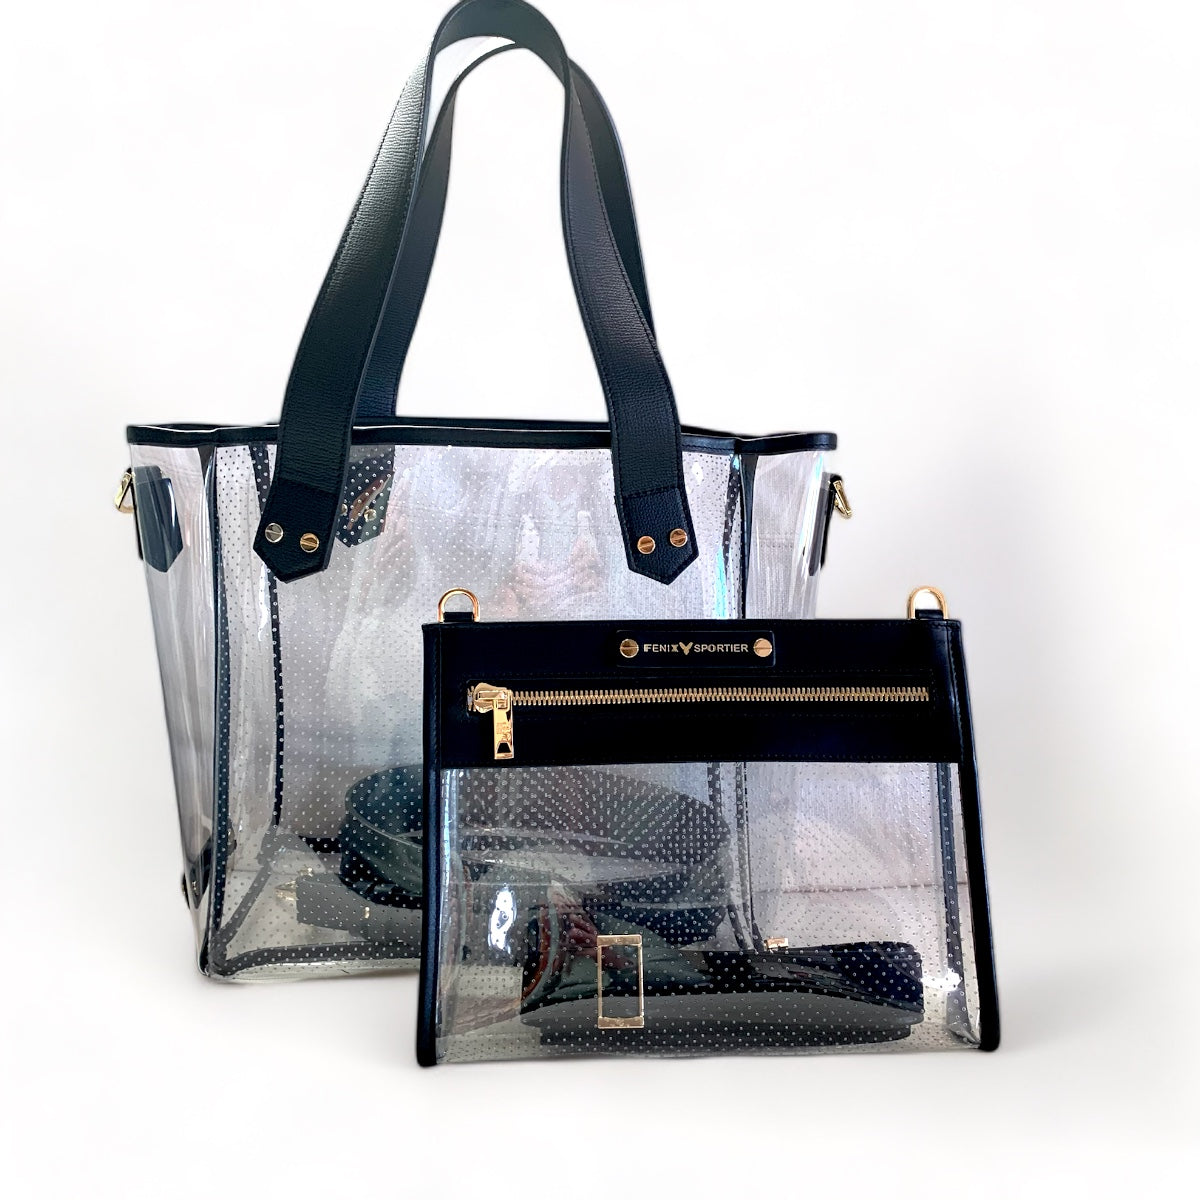 Gameday Bag - Black Leather / Gold Hardware / Clear PVC